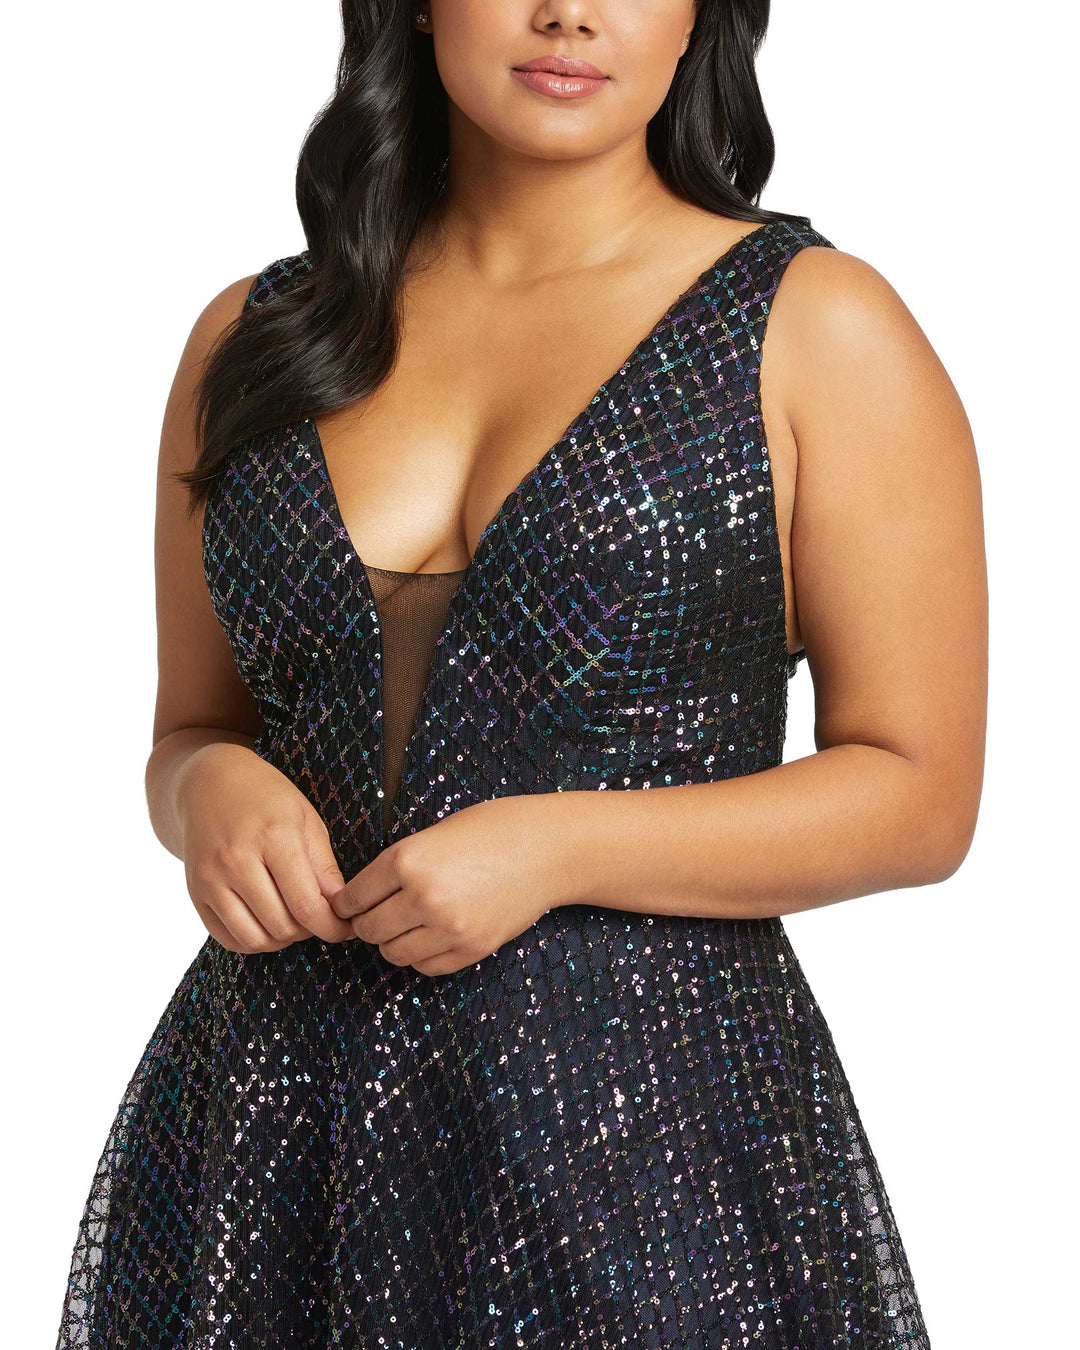 Sequined Illusion V-Neck Evening Gown - FOSTANI